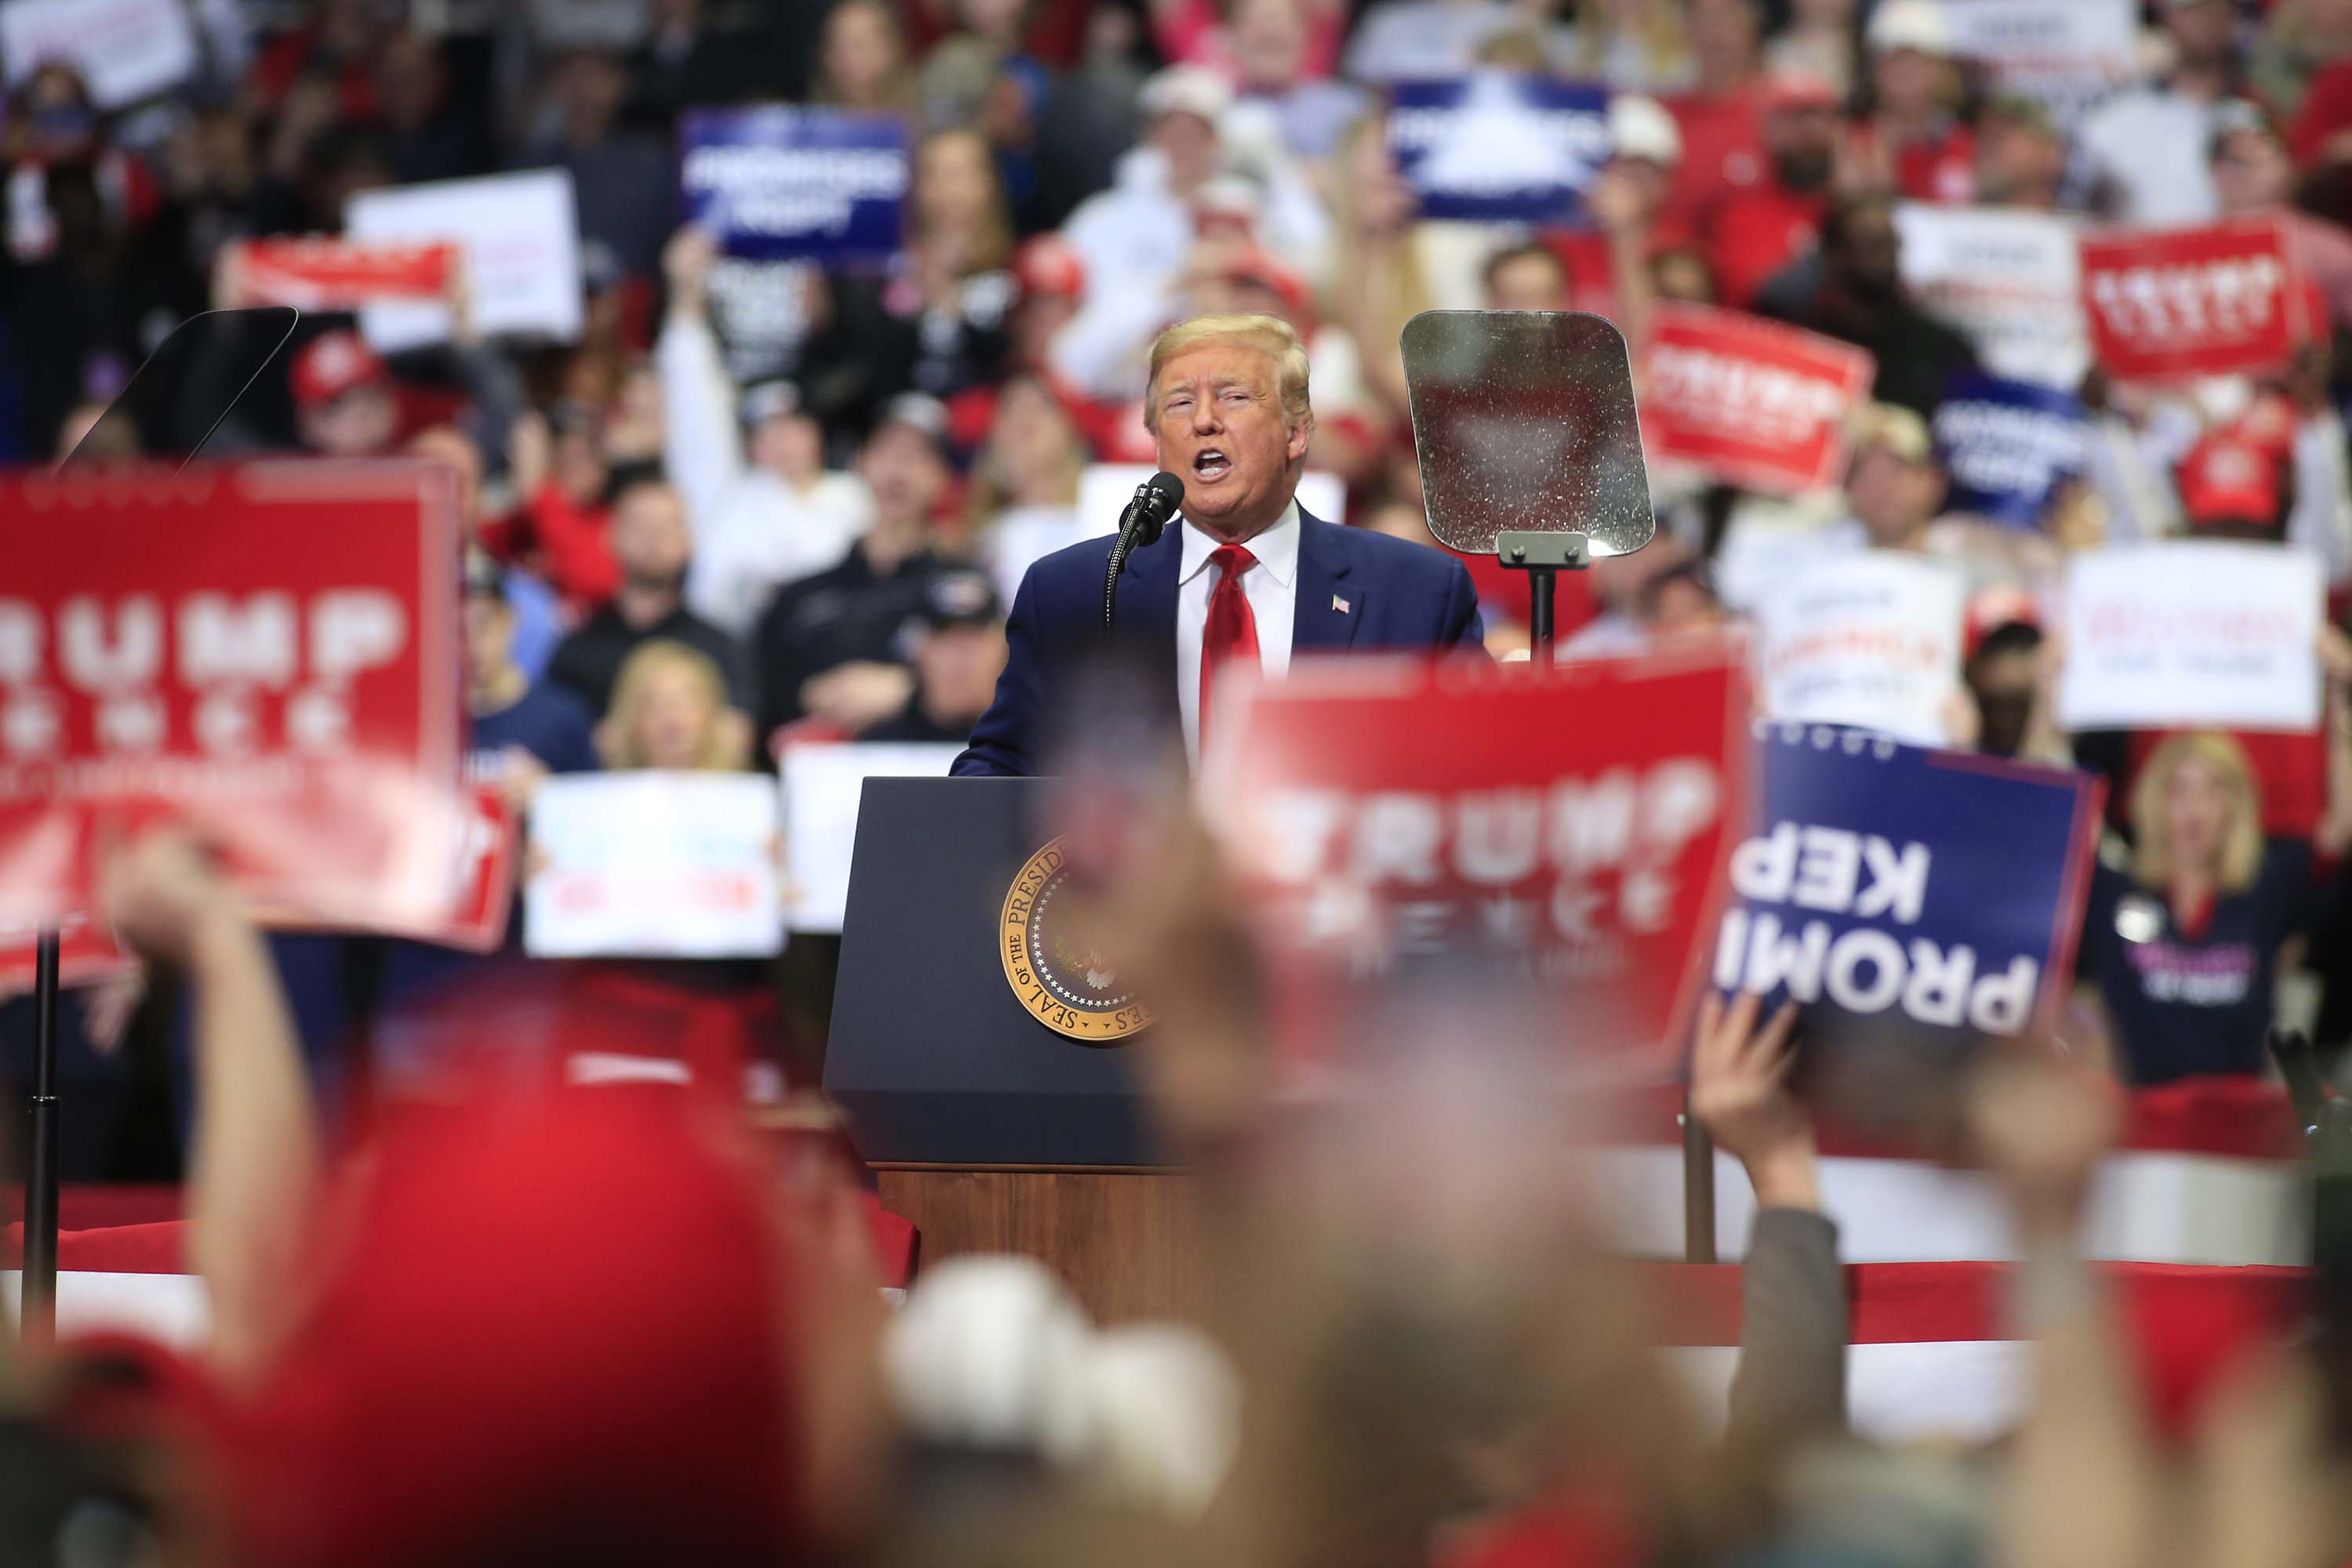 President Trump speaks to supporters during a rally on March 2, in Charlotte, North Carolina.